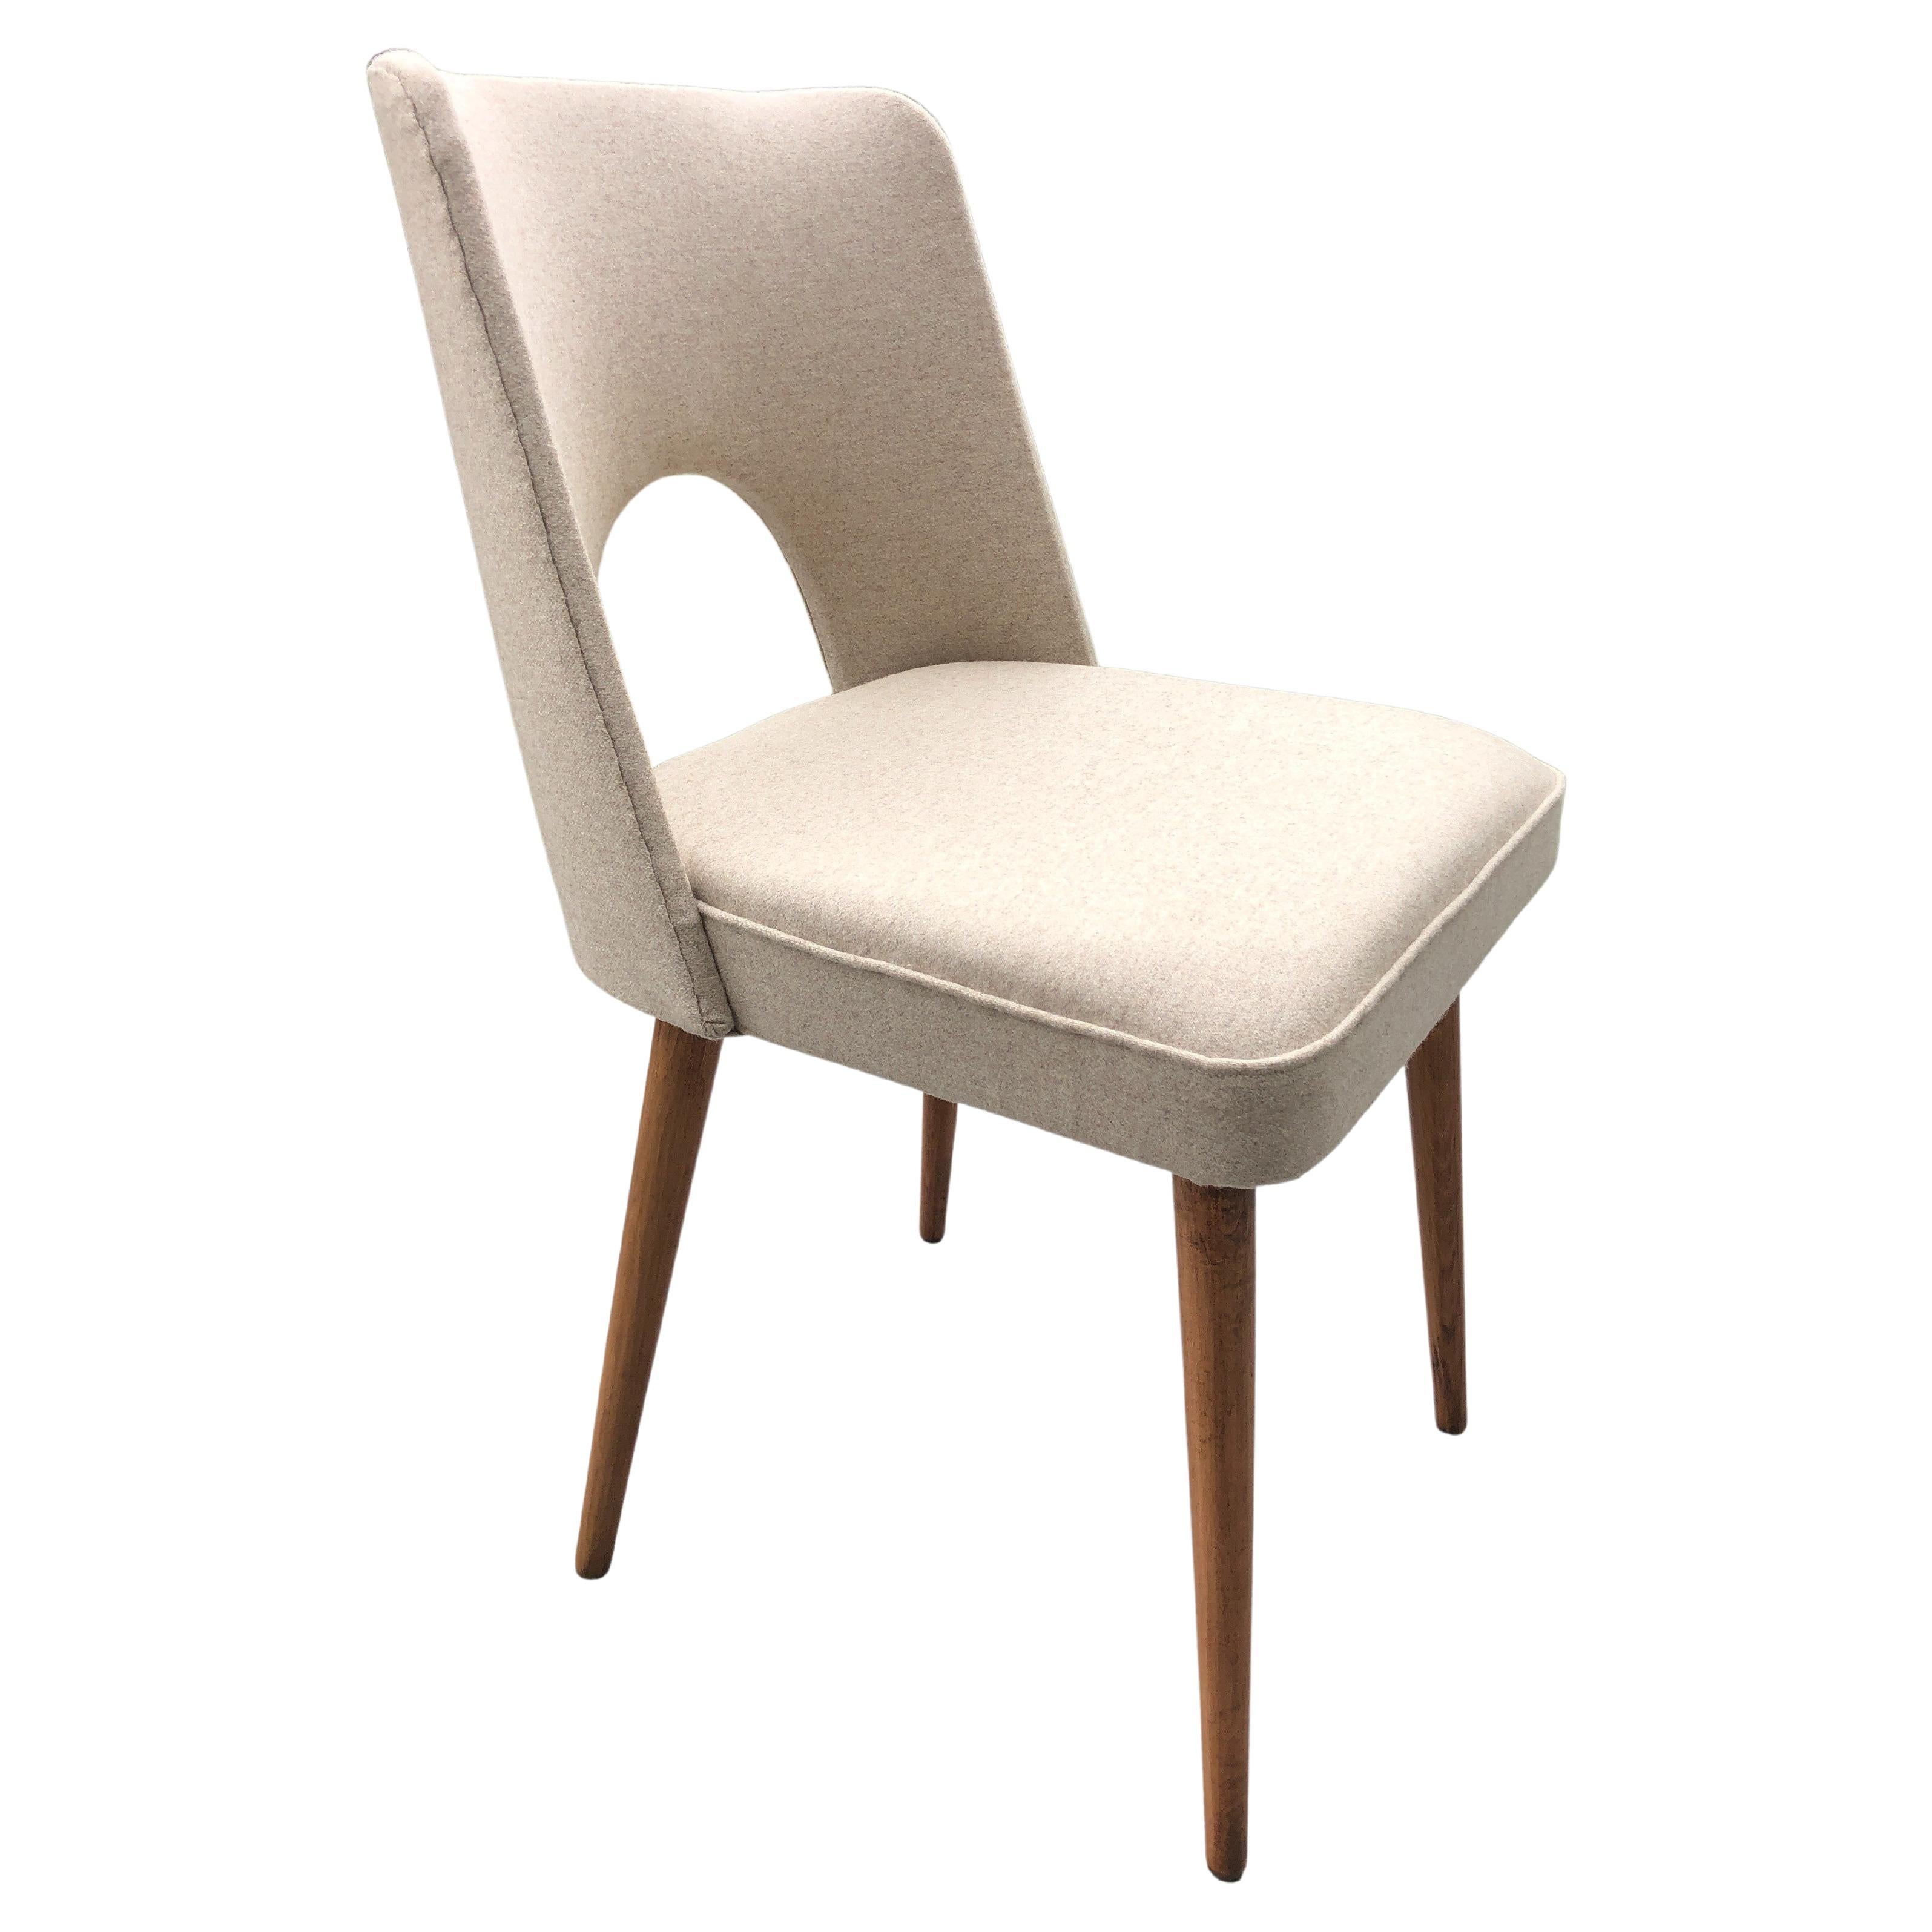 Beige Wool Shell Dining Chair by Lesniewski, 1960s